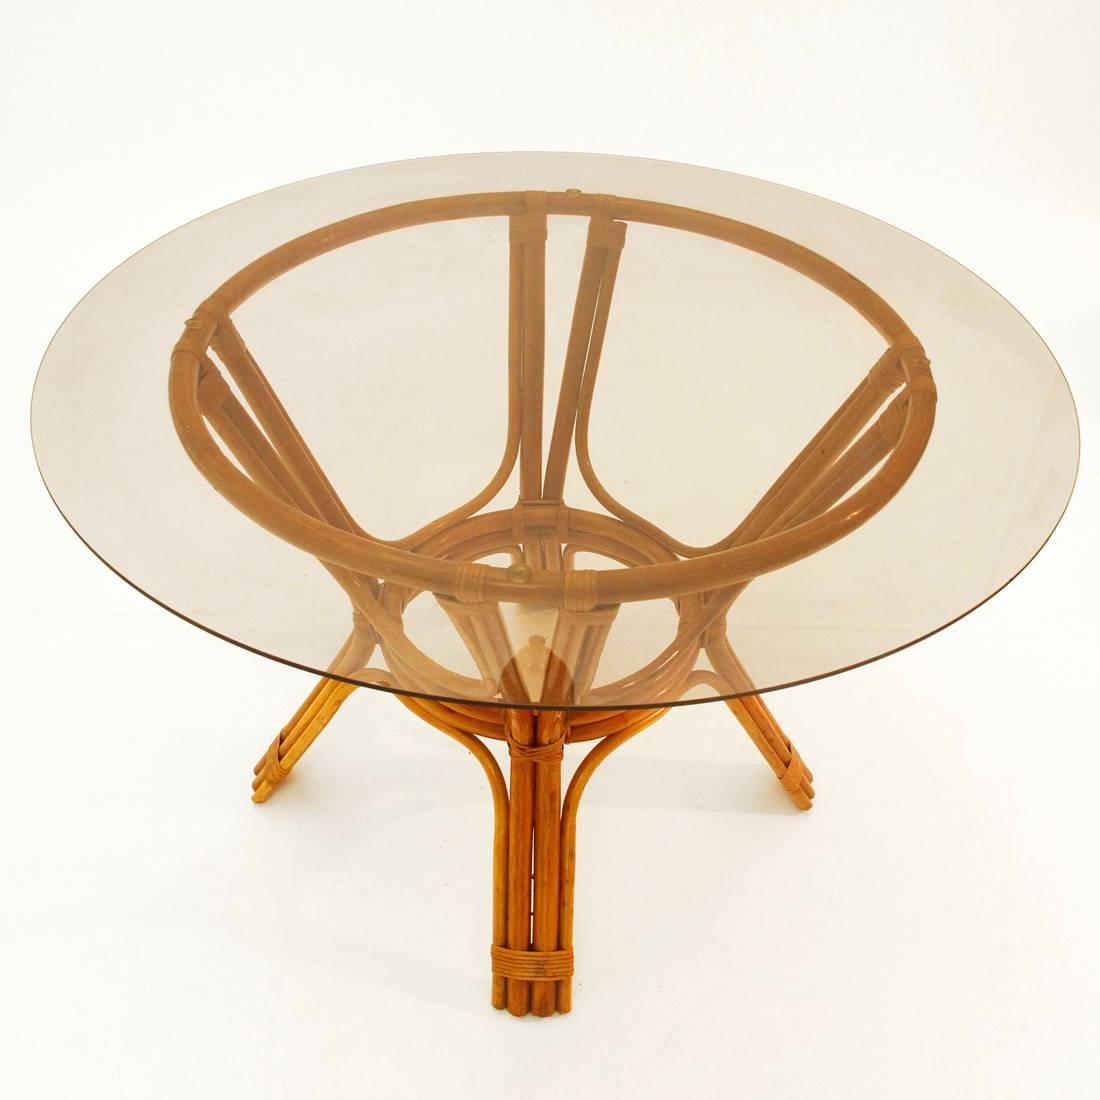 This table was designed in the 1970s and produced in Italy. It features a bamboo structure and a circular glass top.